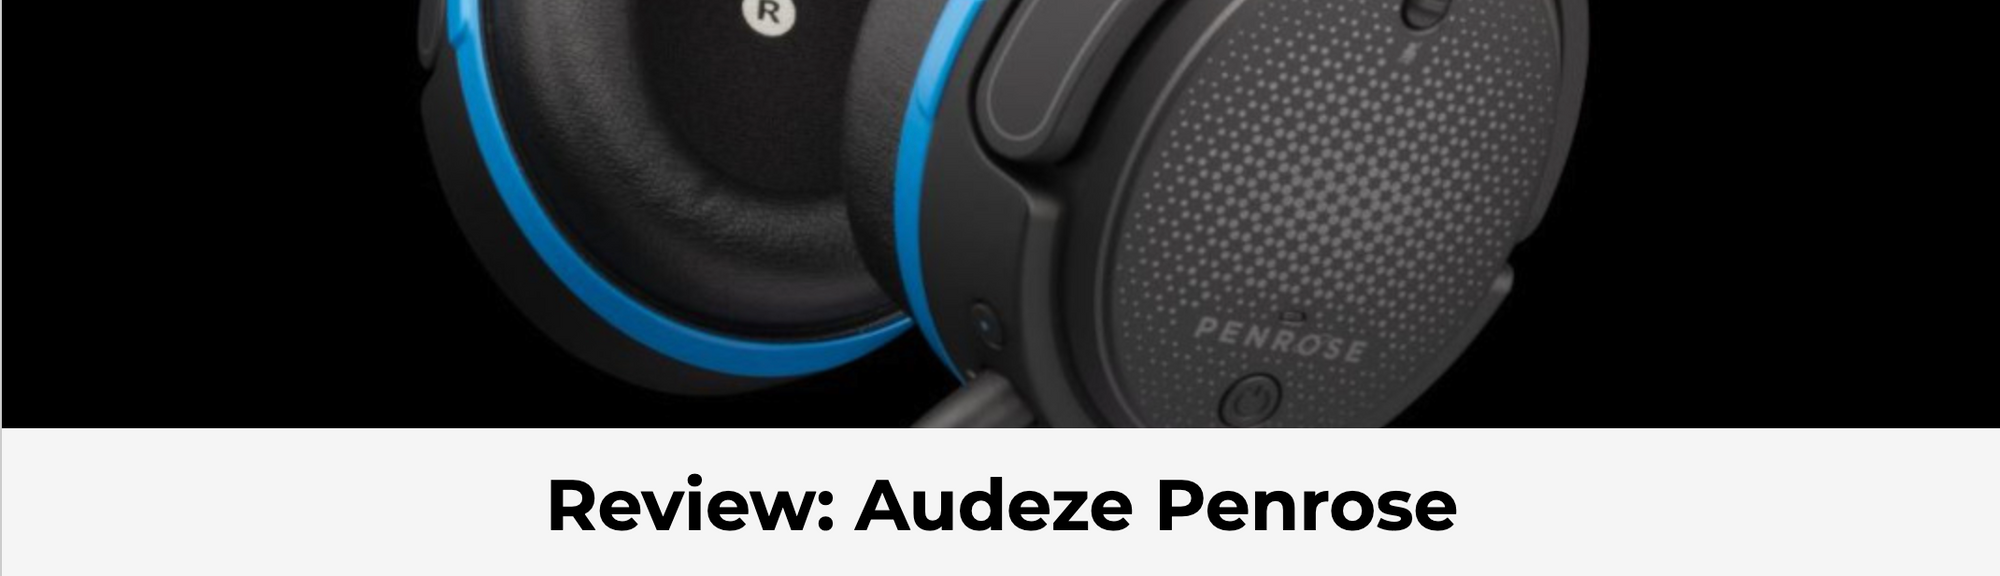 "Penrose is simply one of the best gaming headsets on the market." Says Hardcore Gamer